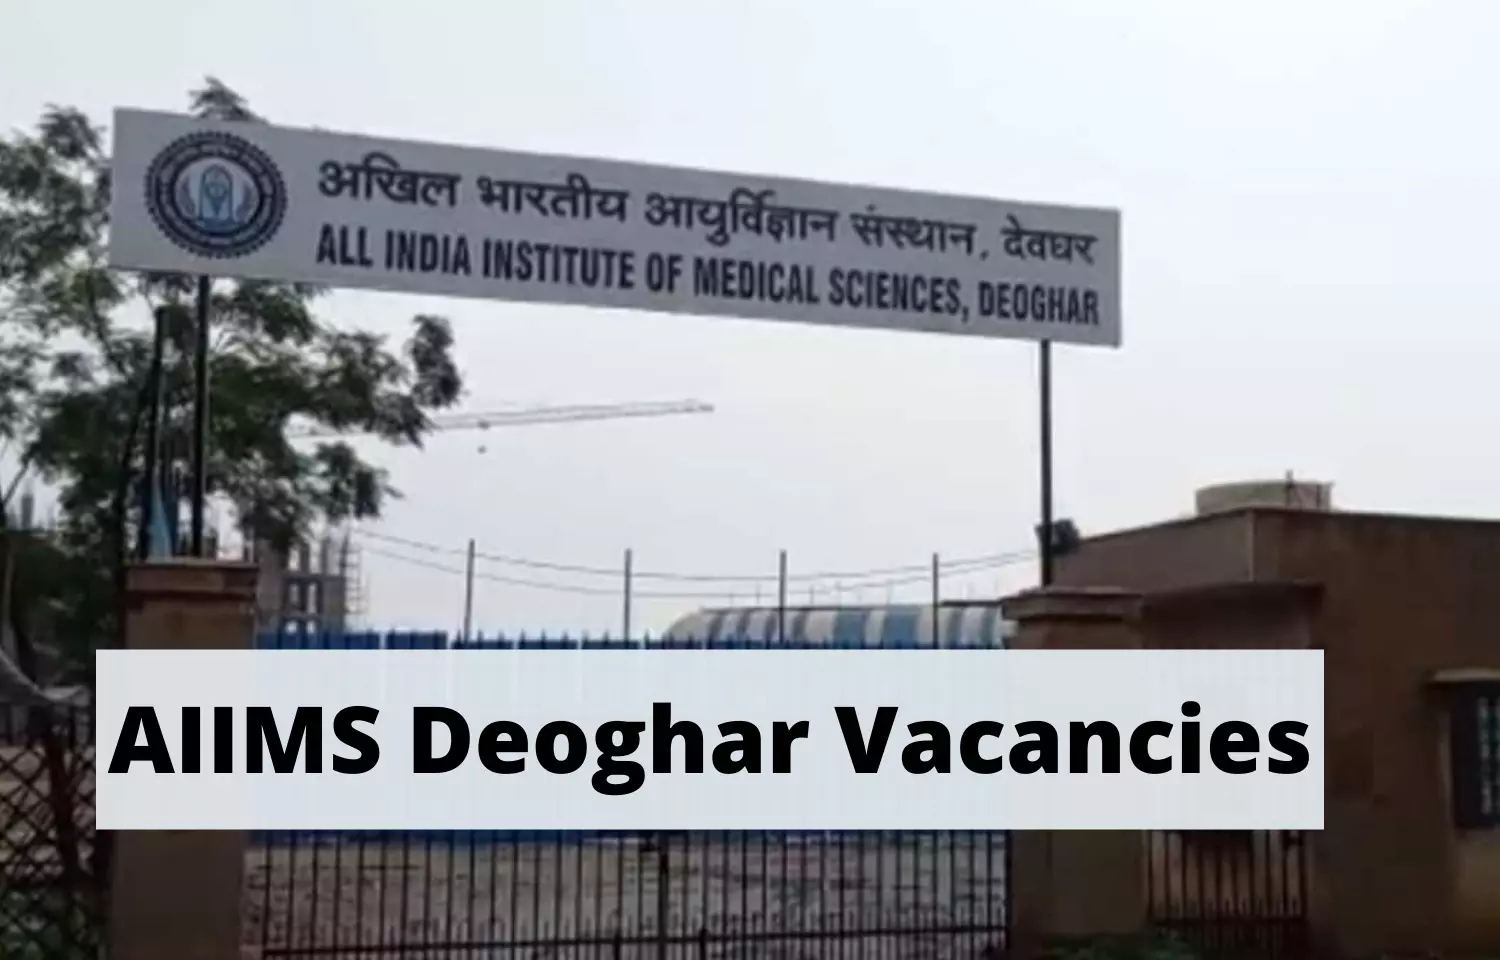 Vacancies For Junior Resident Post At AIIMS Deoghar, Apply Now